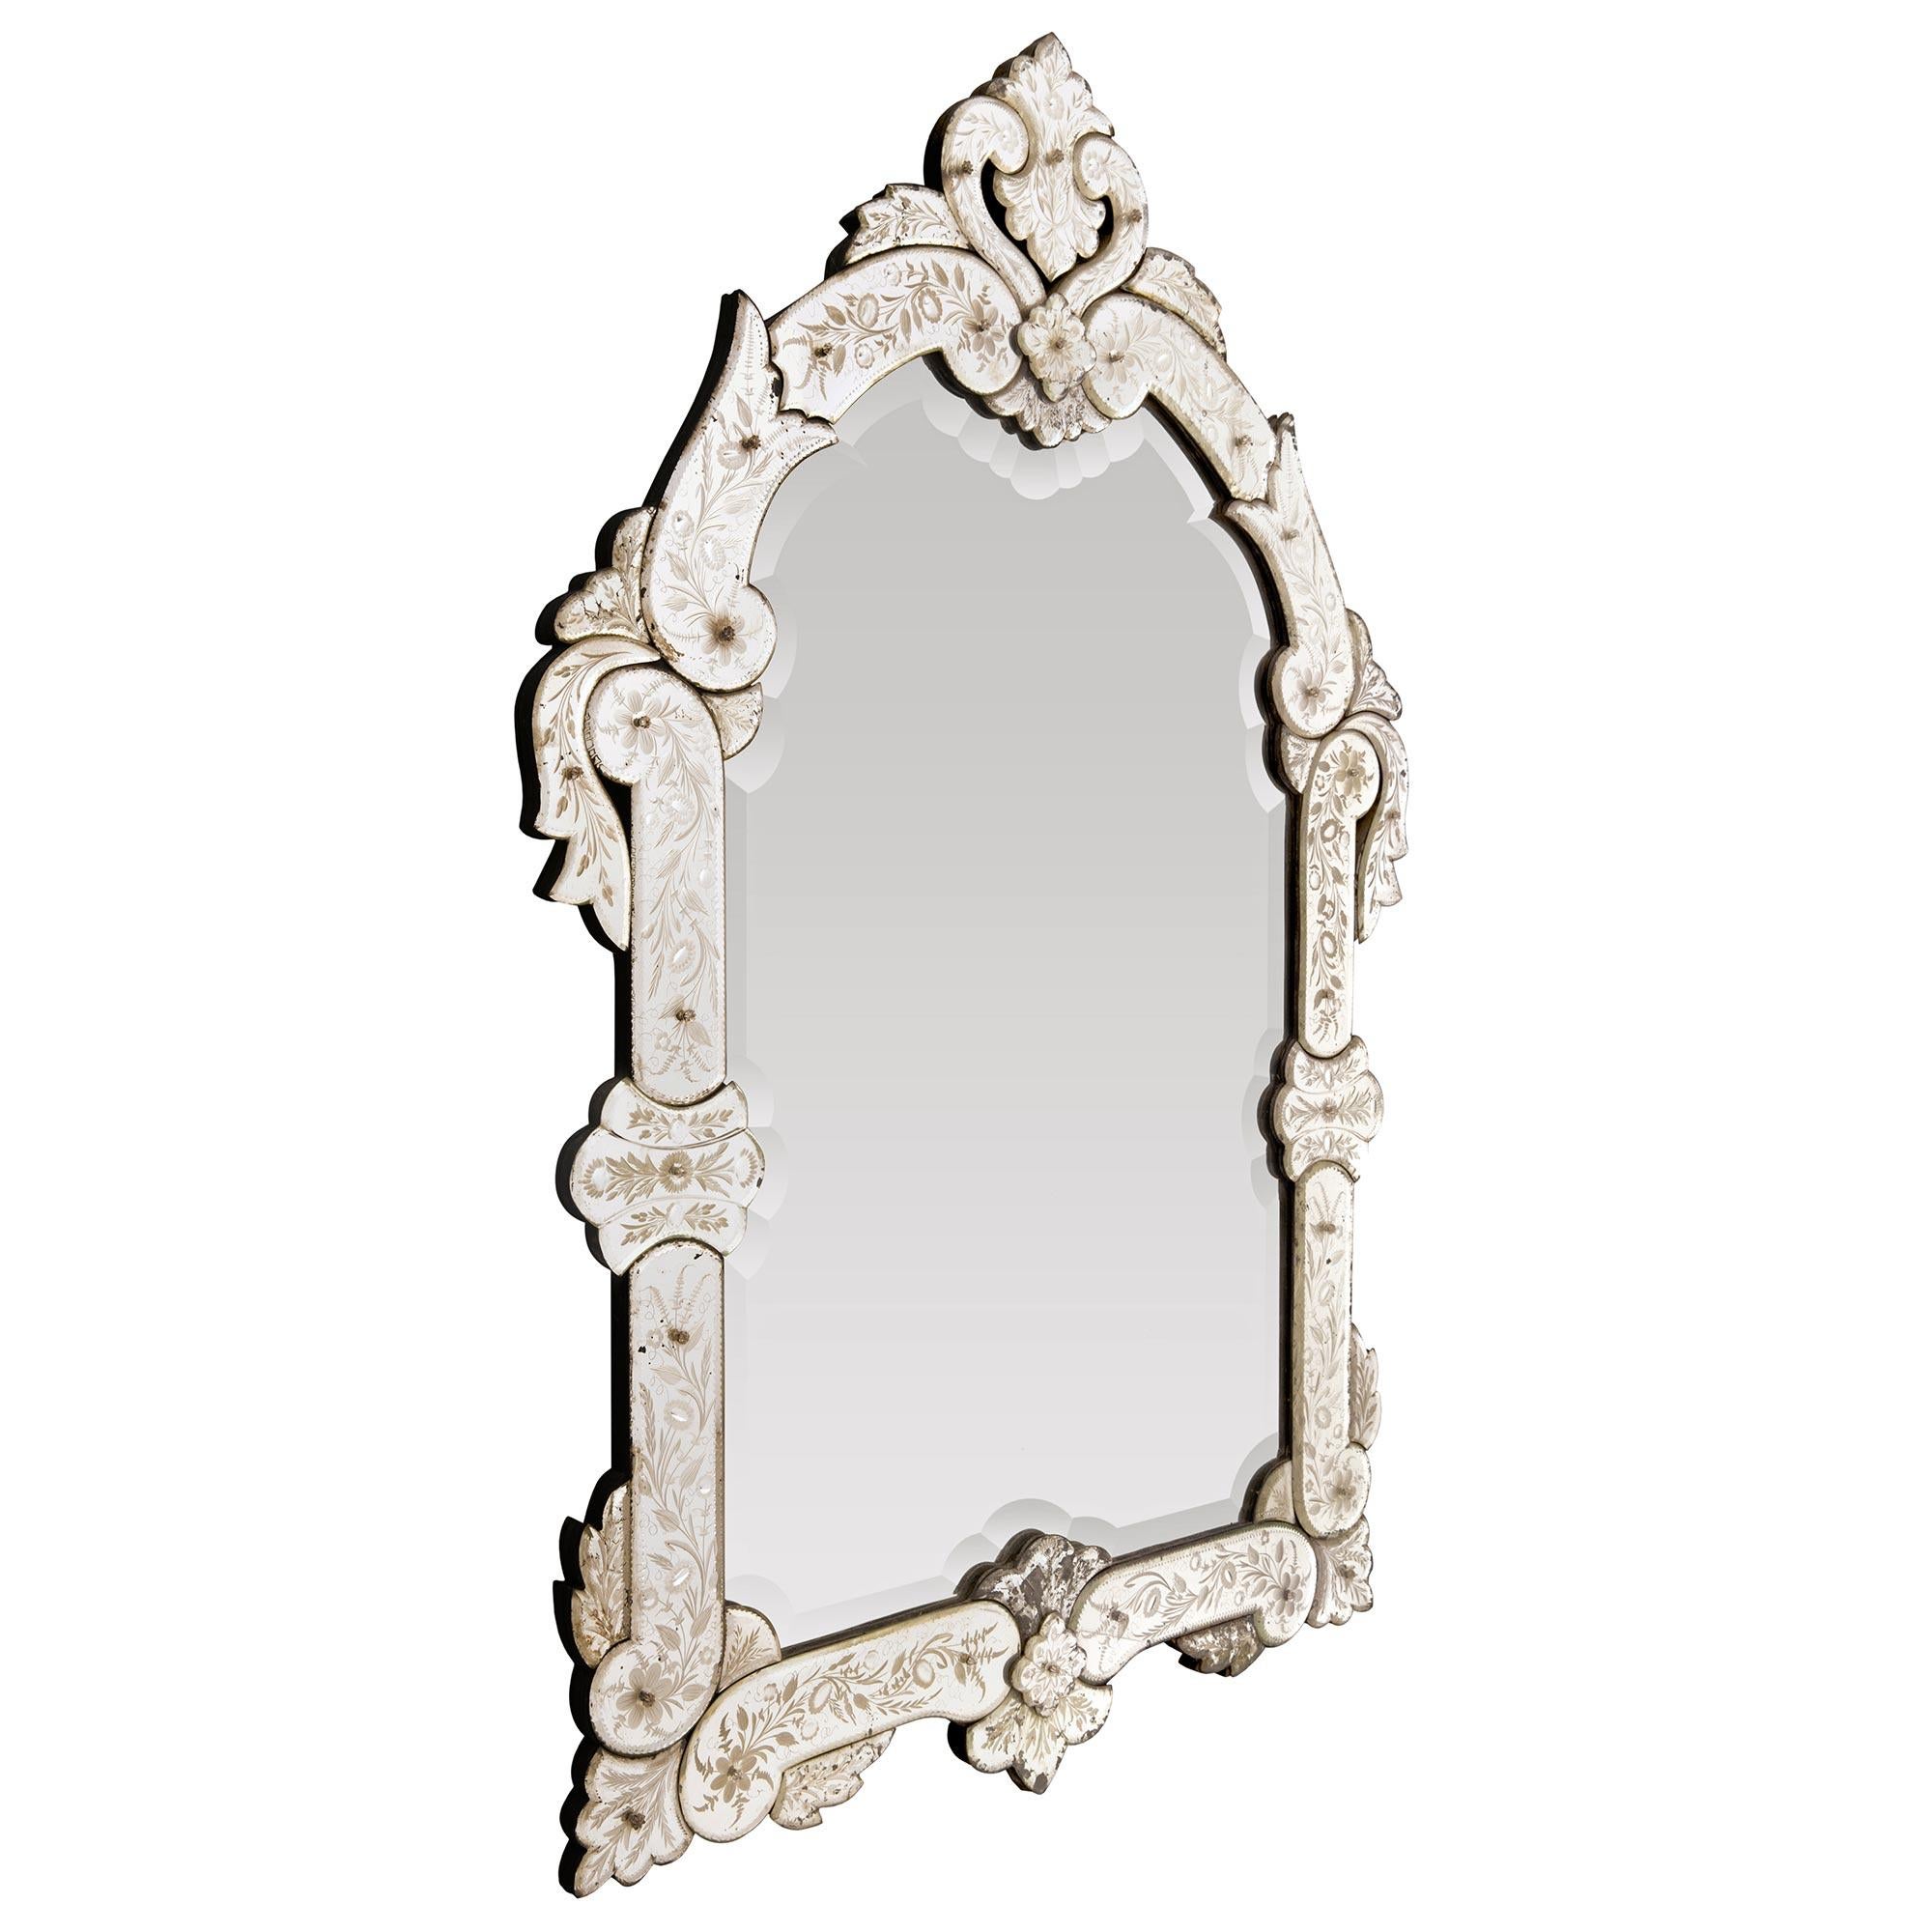 A stunning and extremely decorative Italian 19th century Venetian st. mirror. The mirror retains all of its beautiful original glass components throughout with the central mirror plate displaying an exceptional and wonderfully executed bevel